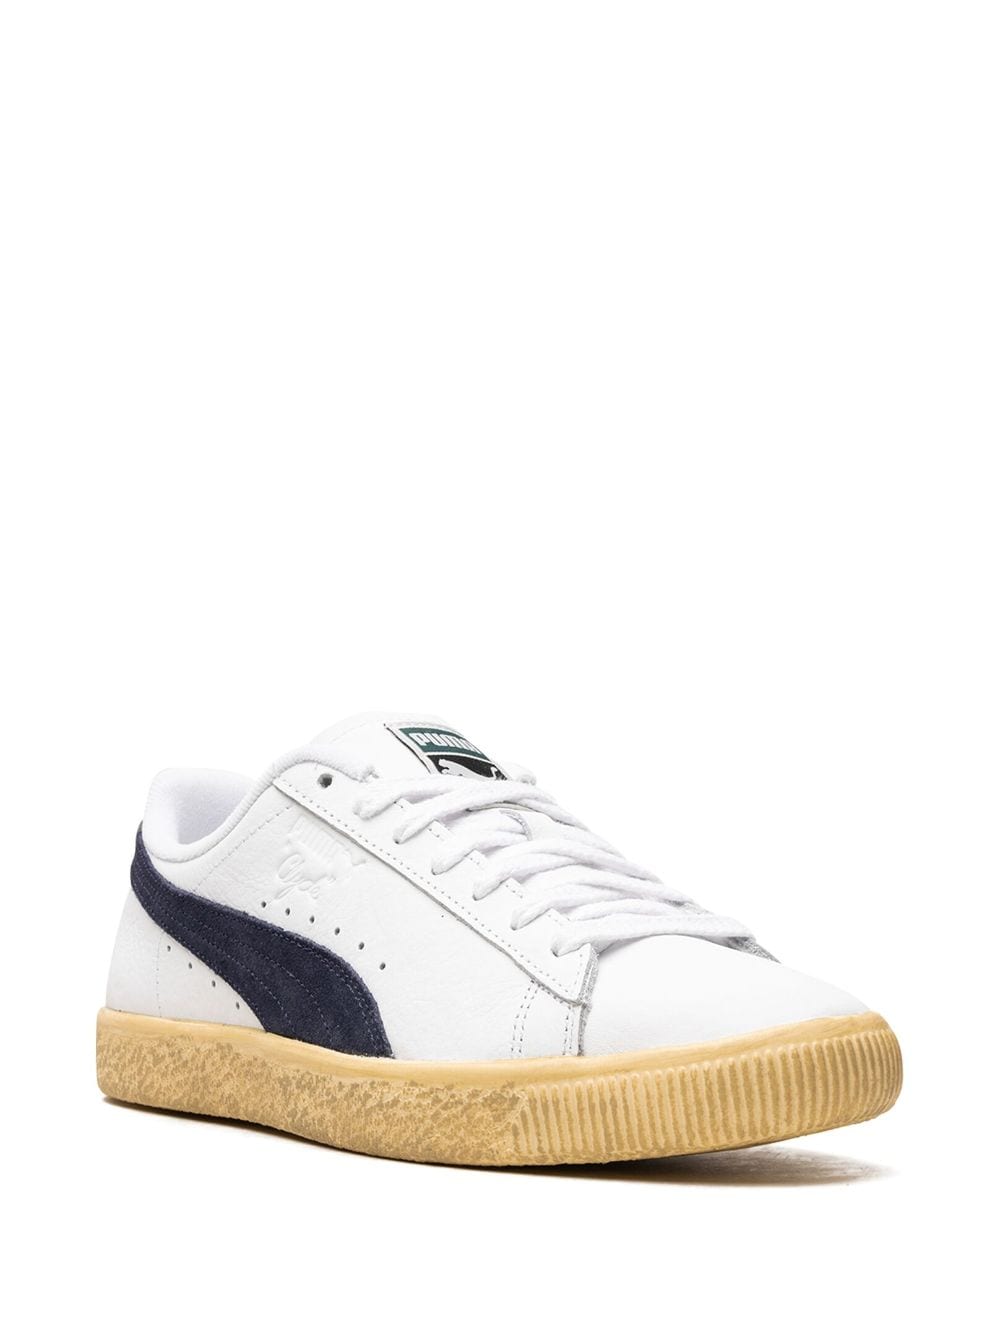 PUMA Clyde Vintage Leather Sneakers - Farfetch